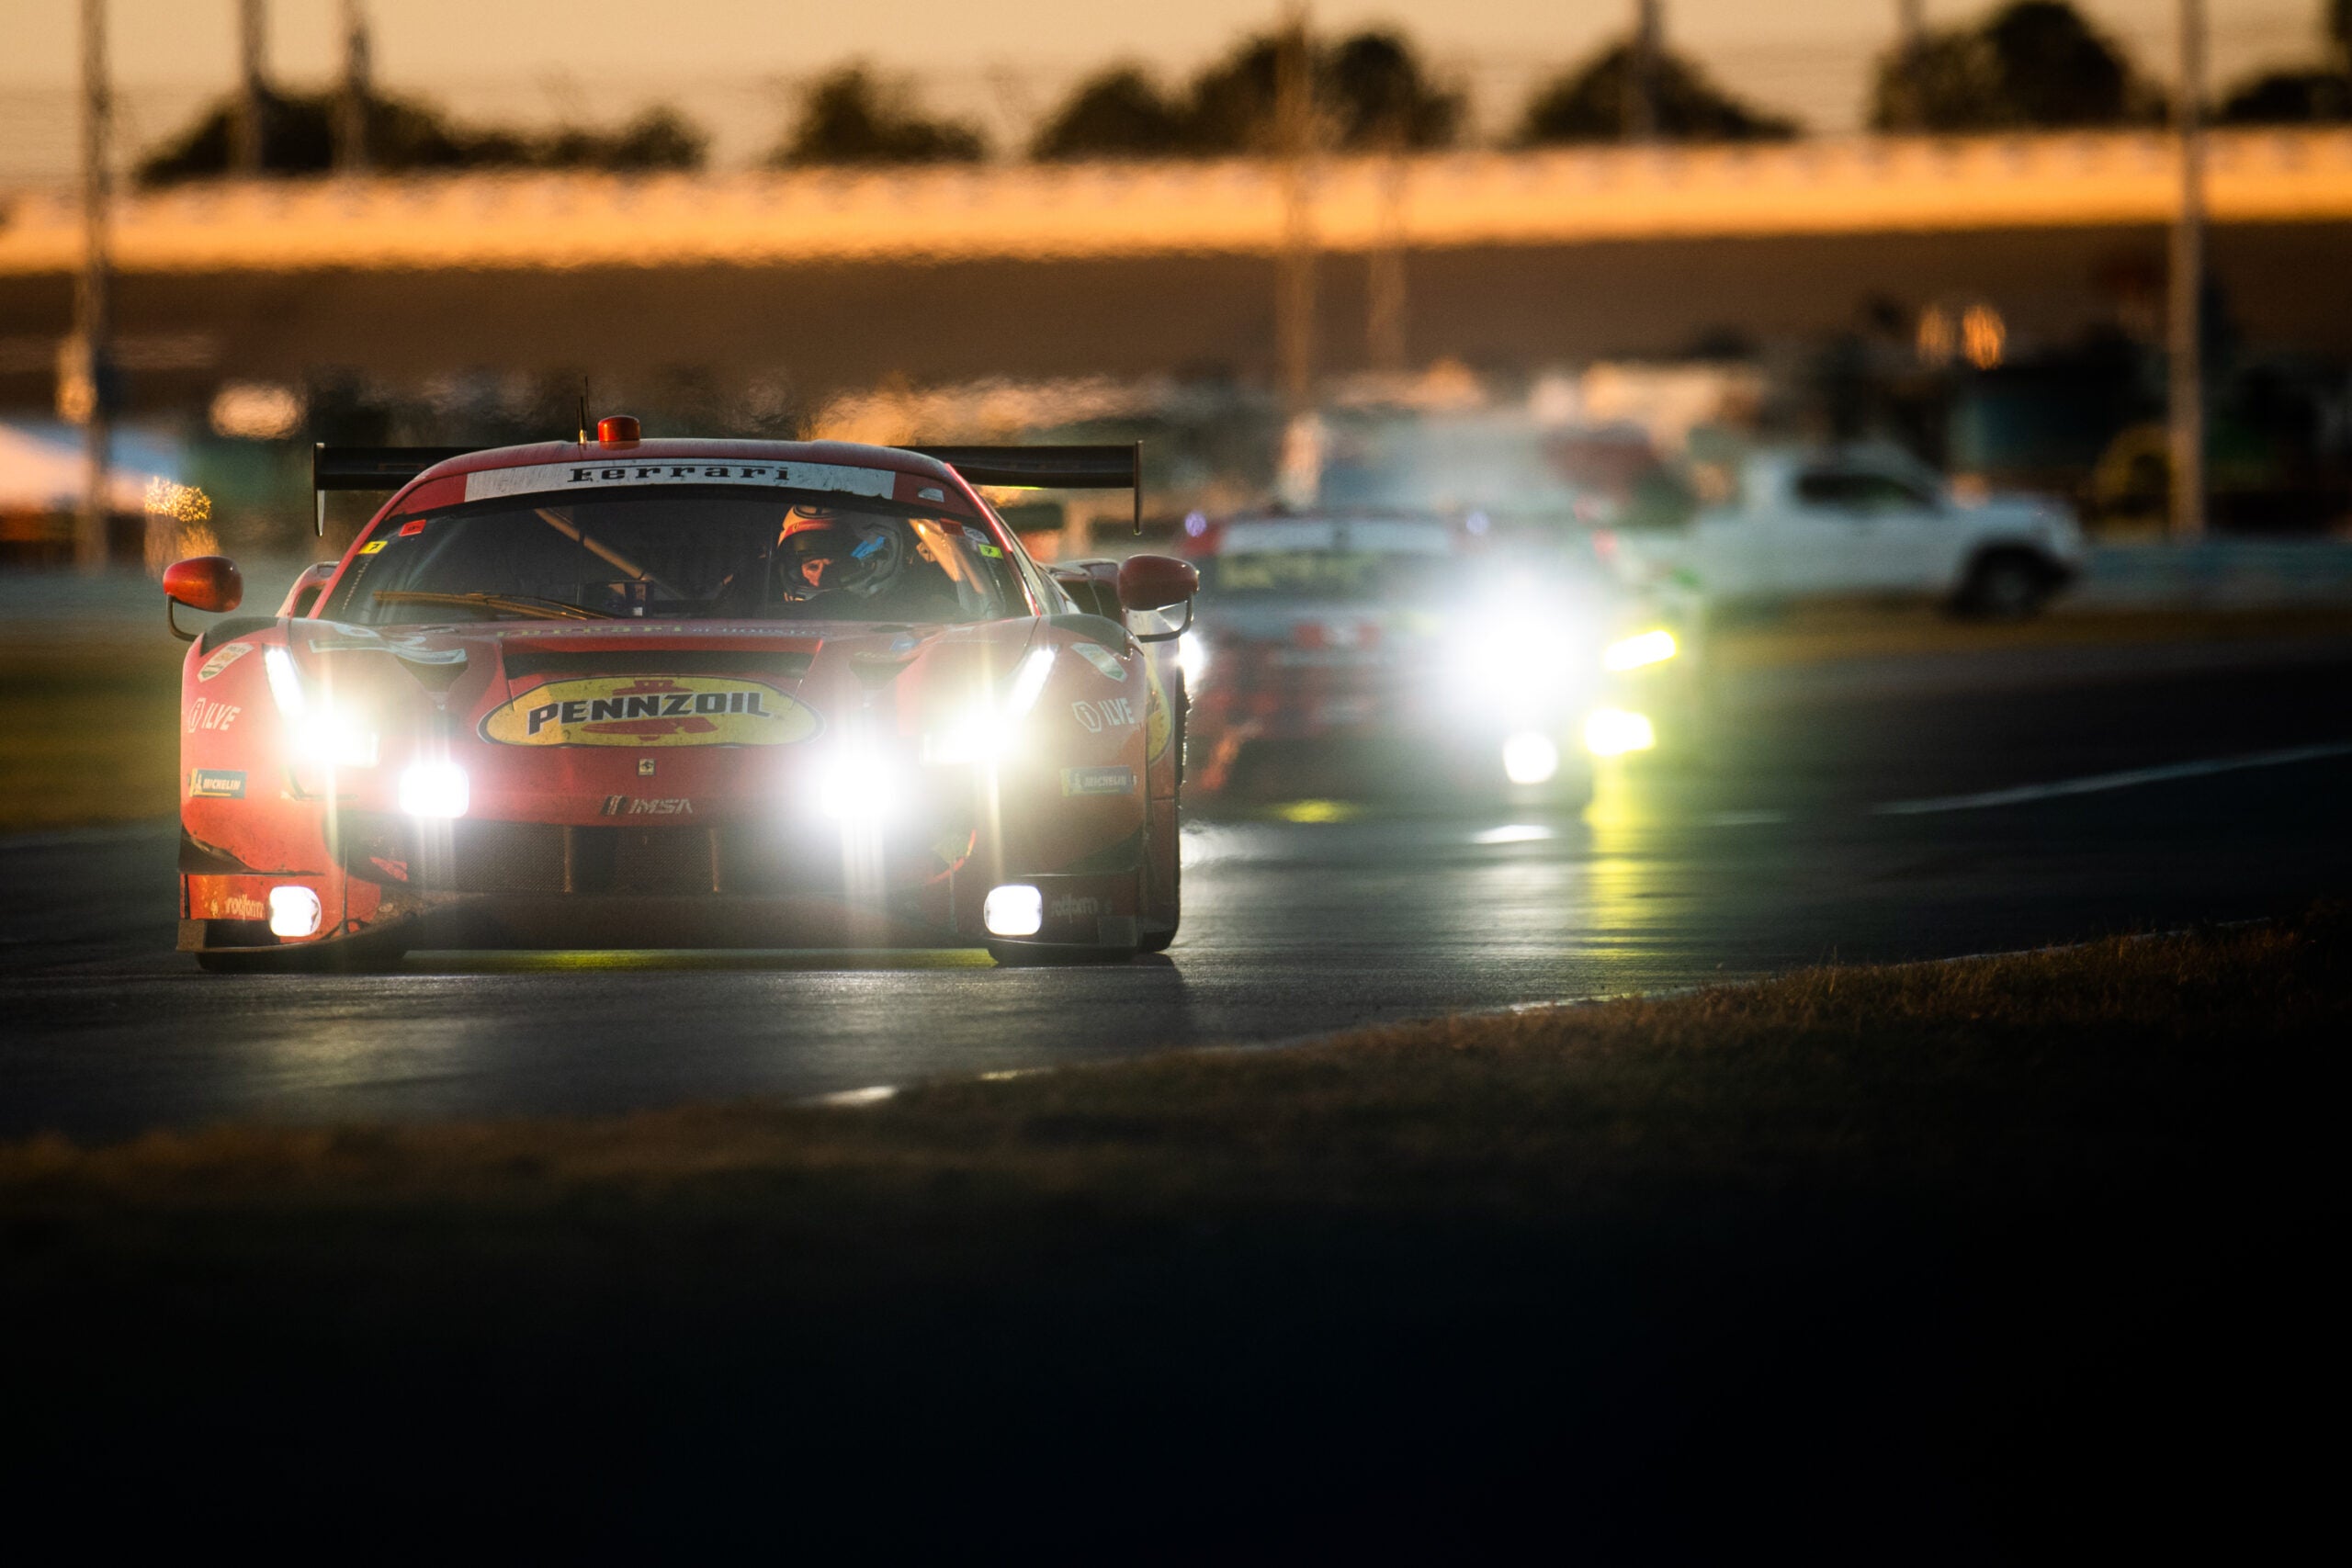 A photo by Jamey Price from the 2022 Rolex 24 at Daytona, a 24-hour race held at Daytona International Speedway.